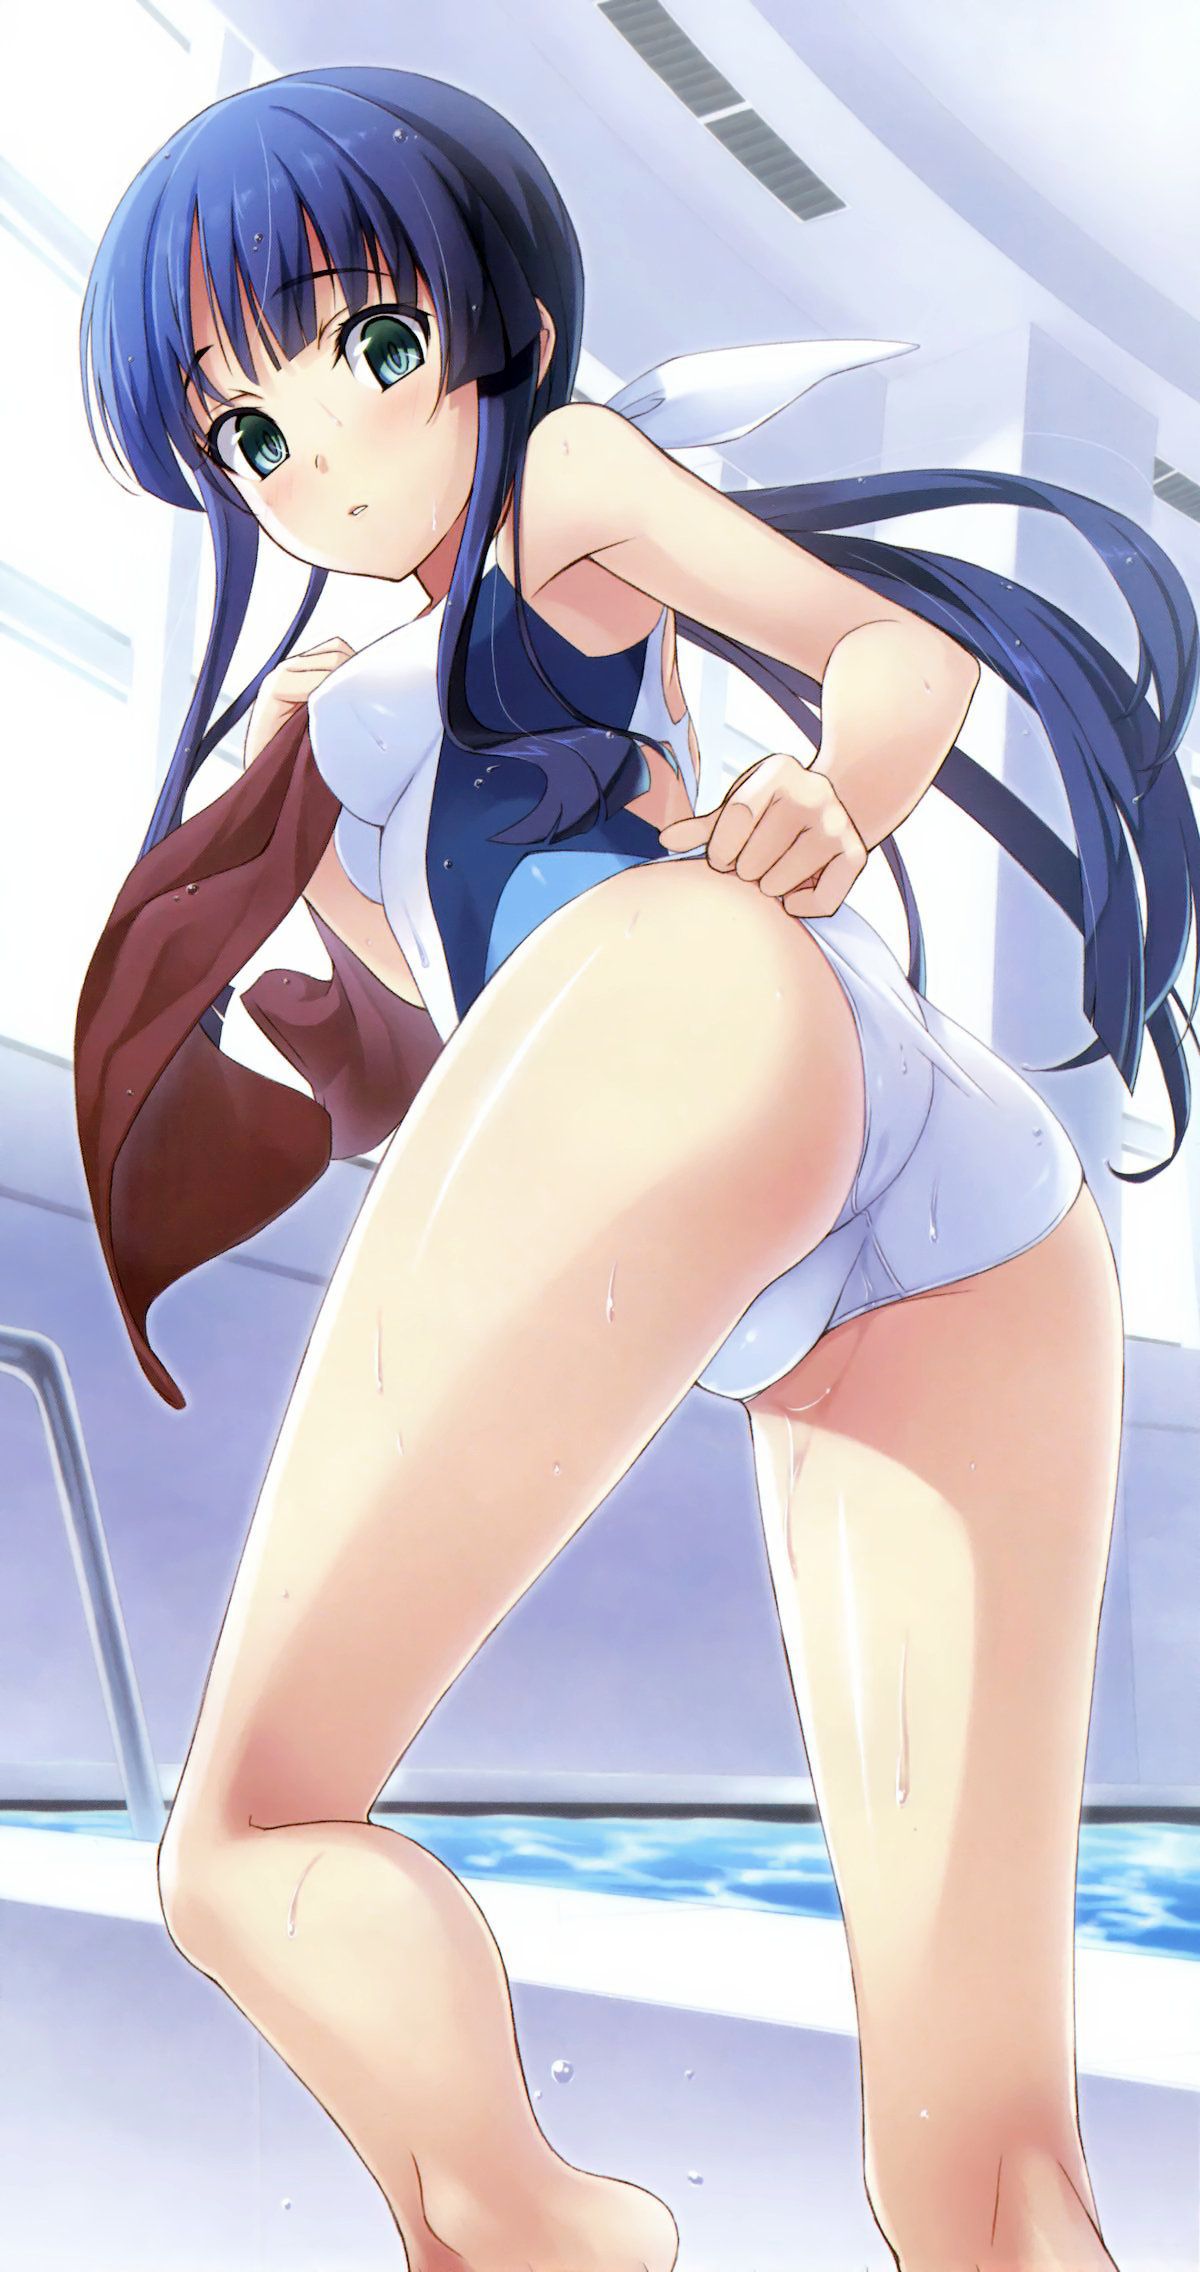 It comes more than a usual swimsuit! Second erotic image of the girl in the swimsuit wwww Part 5 5